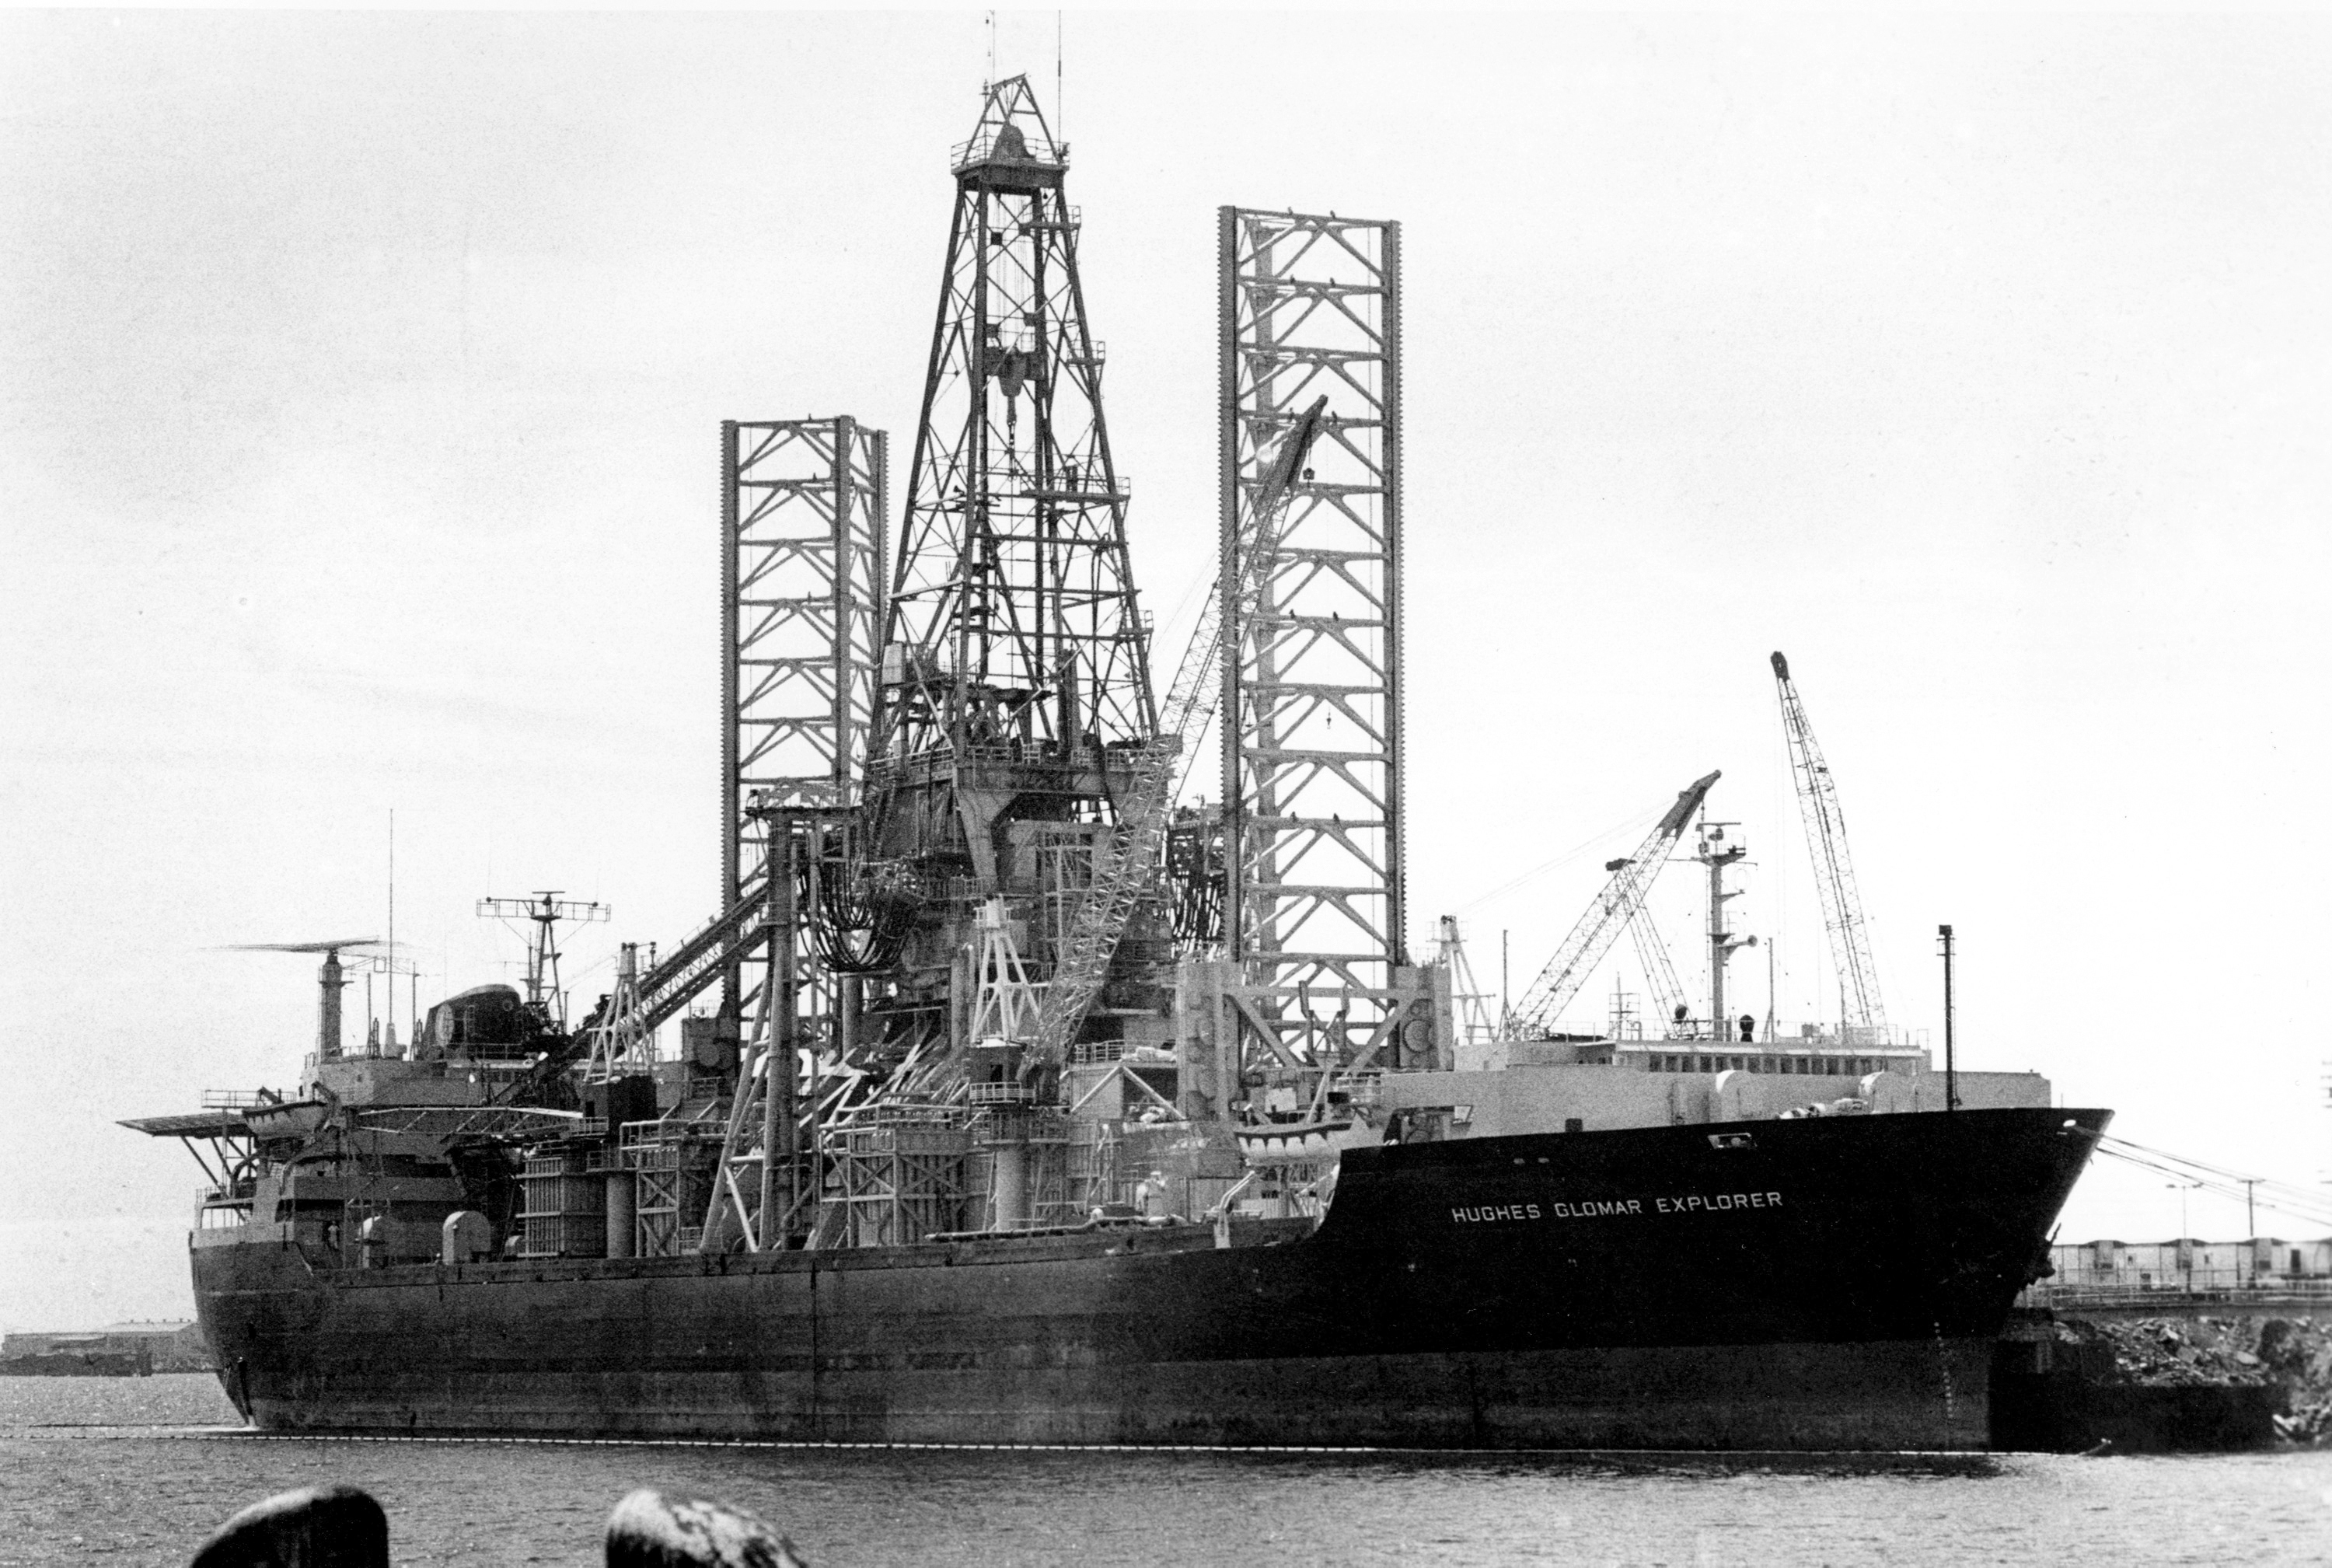 FILE - The Hughes Glomar Explorer, a 618-foot-long salvage ship built by Howard Hughes, sits at the Long Beach harbor dock in Los Angeles, March 19, 1975. The crane barge that's been hauling away shattered beams of steel from the Baltimore bridge collapse played a much different role during the Cold War when the CIA used Hughes' specialized ship to embark on a top-secret mission to retrieve a sunken Soviet submarine. (AP Photo, File)